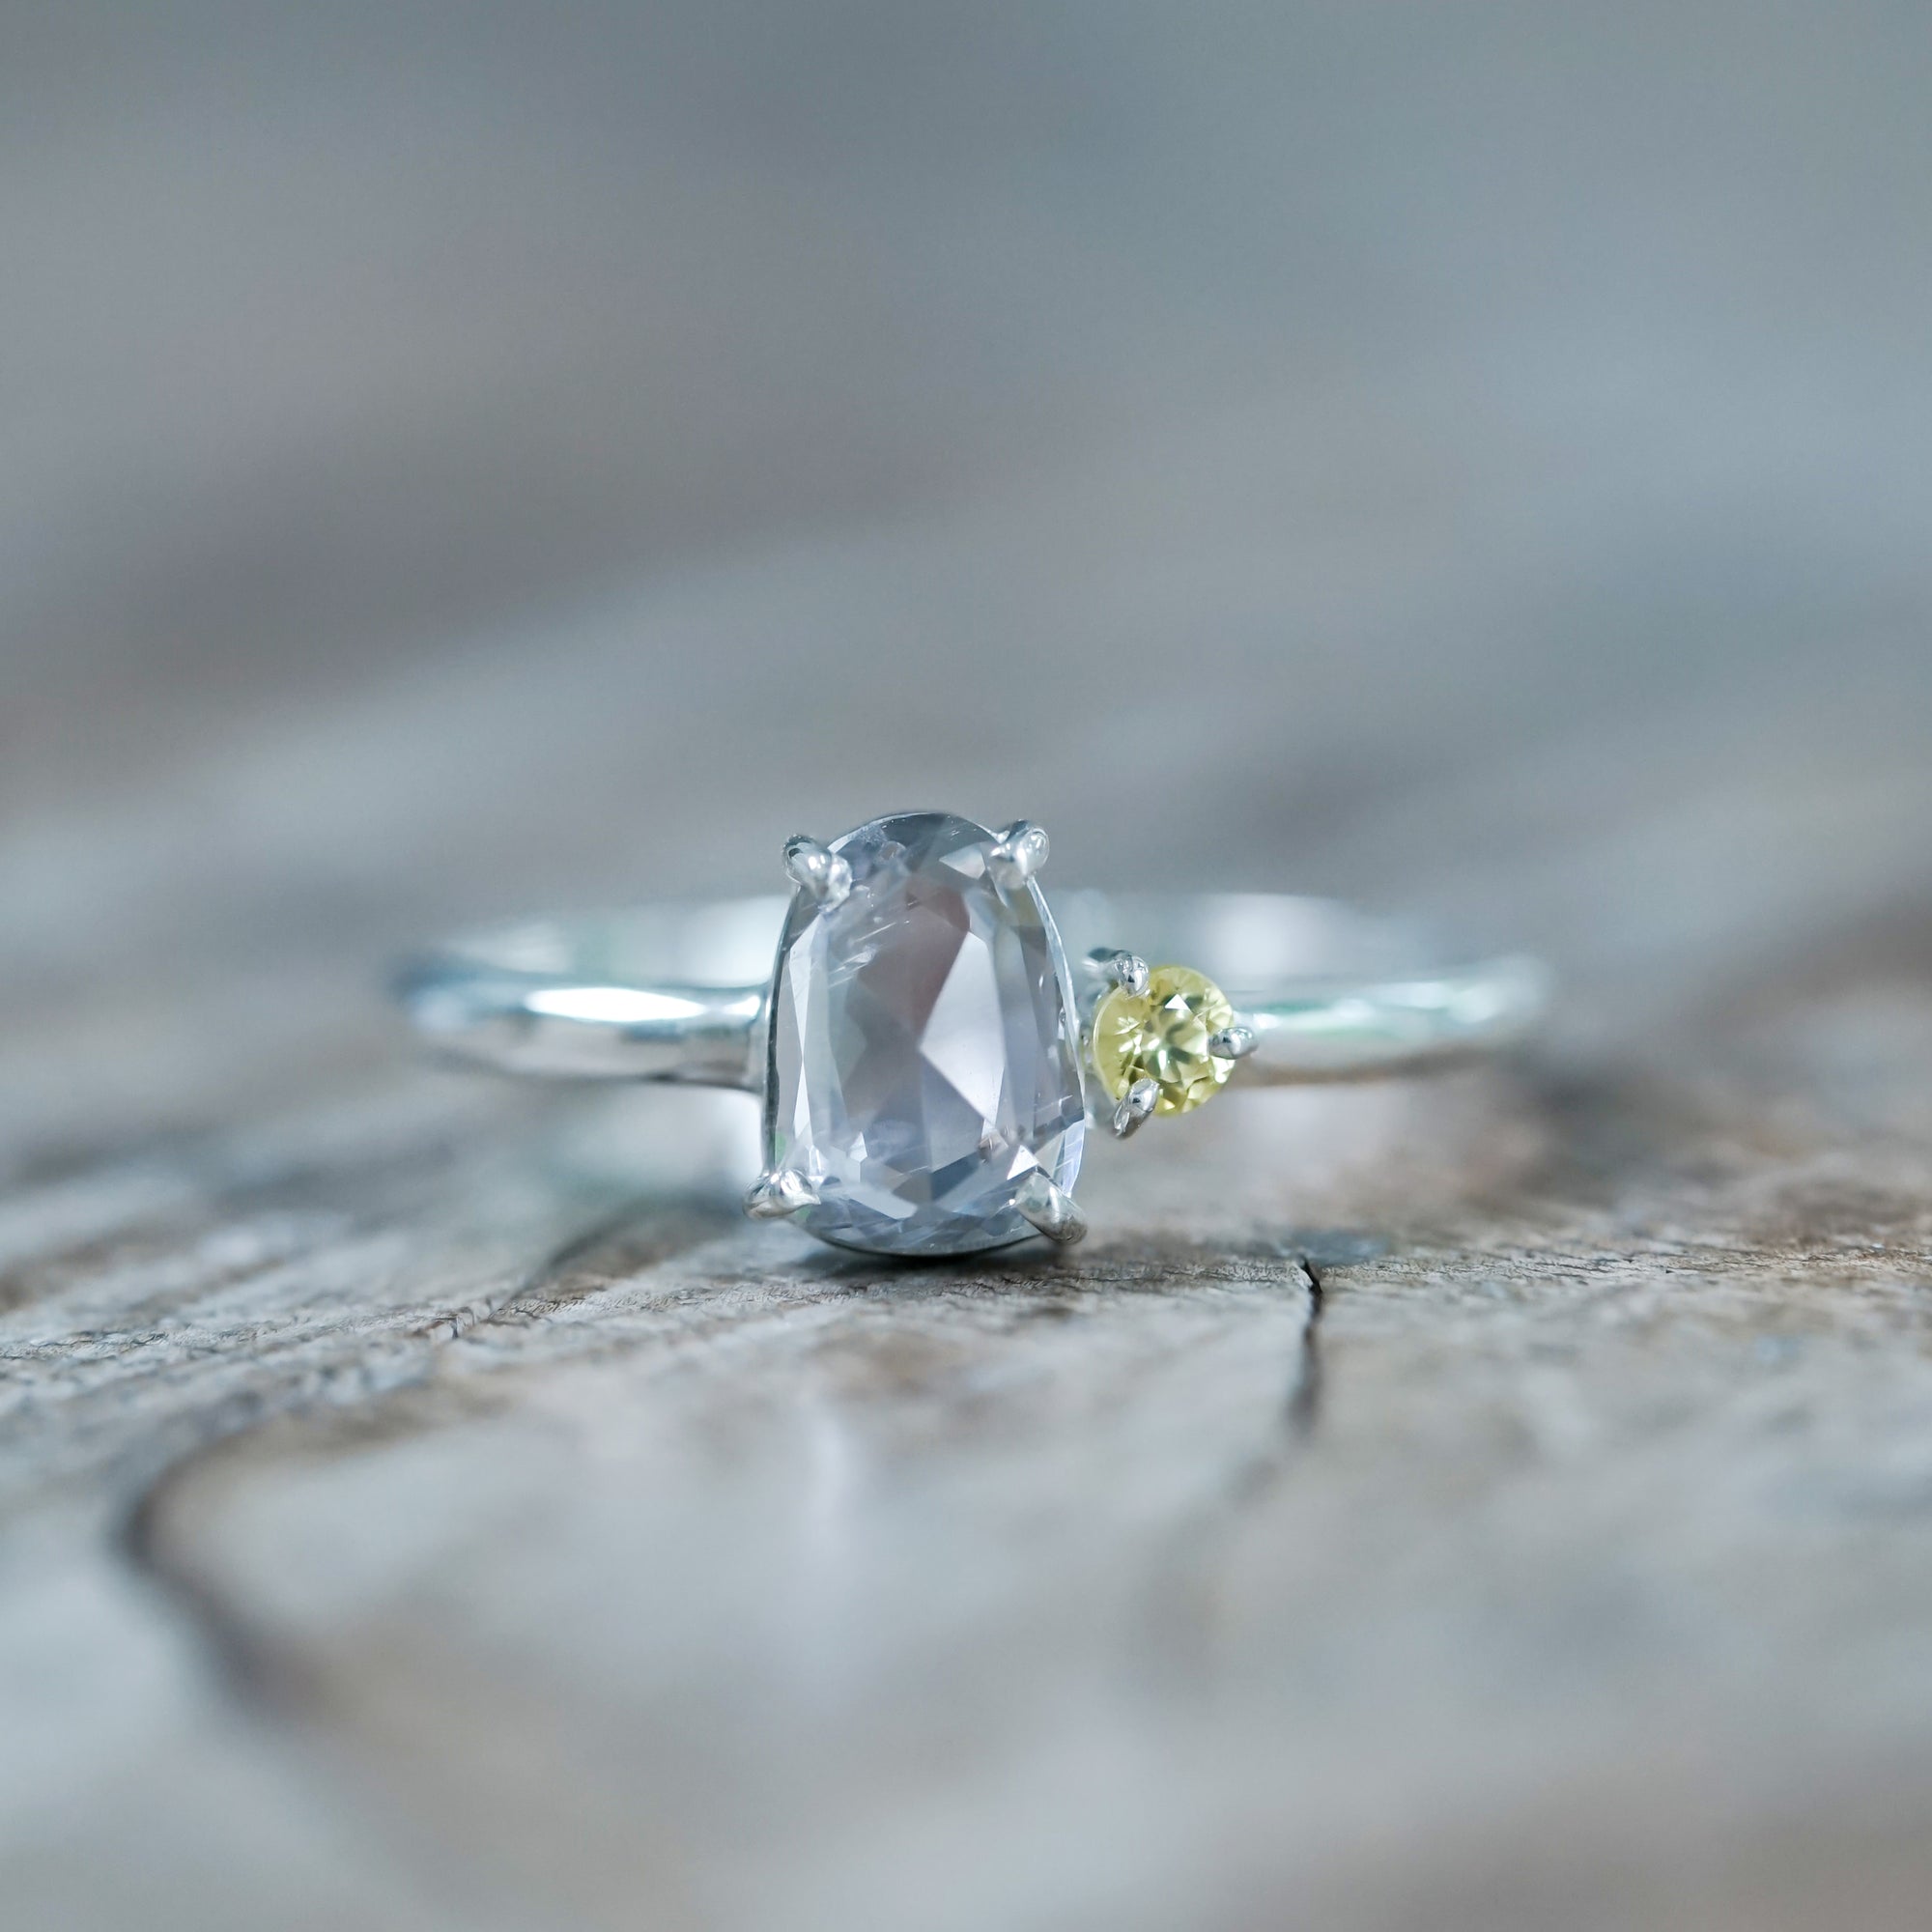 Rose Cut Montana Sapphire Ring - Gardens of the Sun | Ethical Jewelry